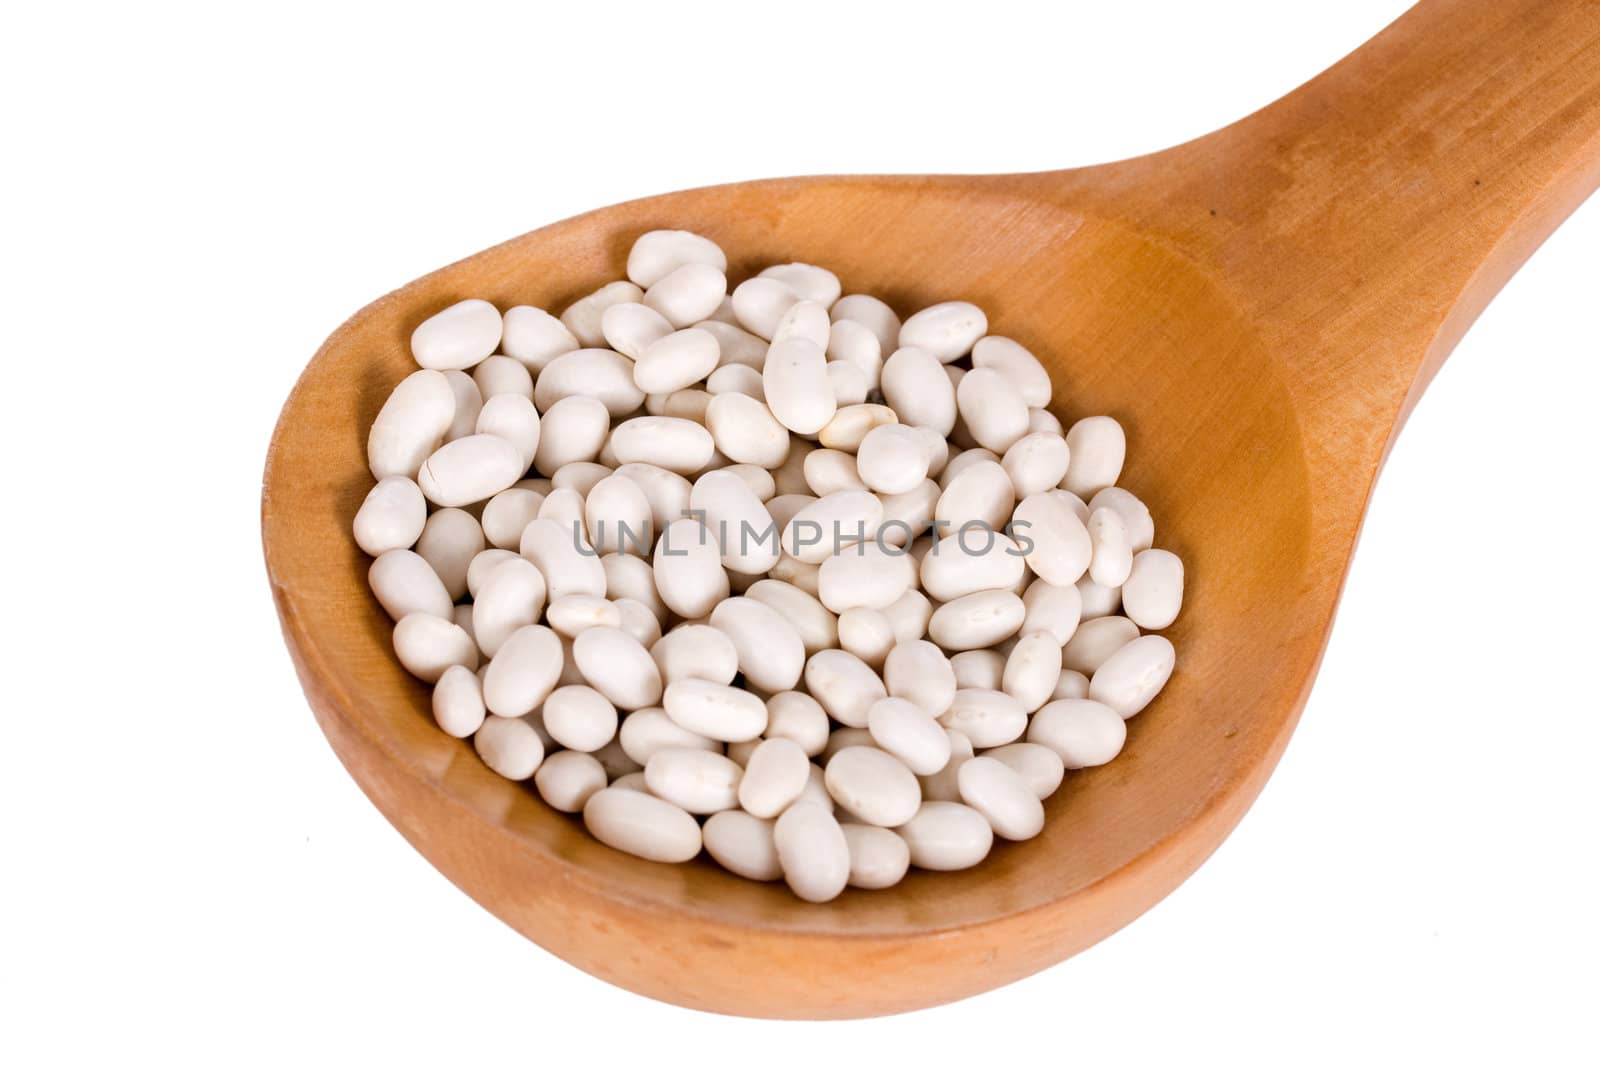 White kidney beans in a wooden spoon isolated on white background